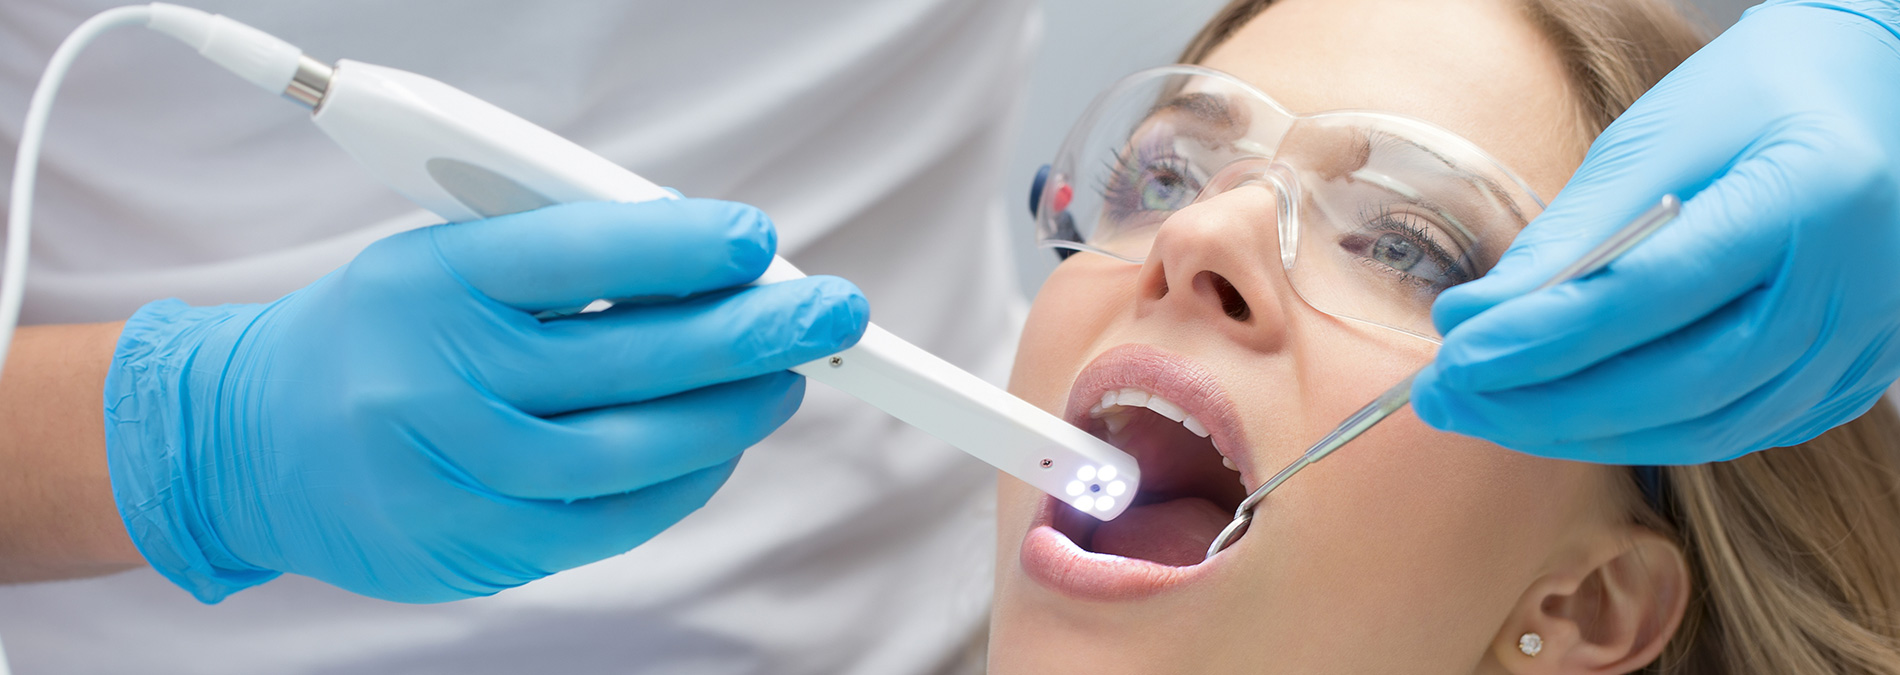 Valstad Dental | Laser Dentistry, Dental Cleanings and Sports Mouthguards